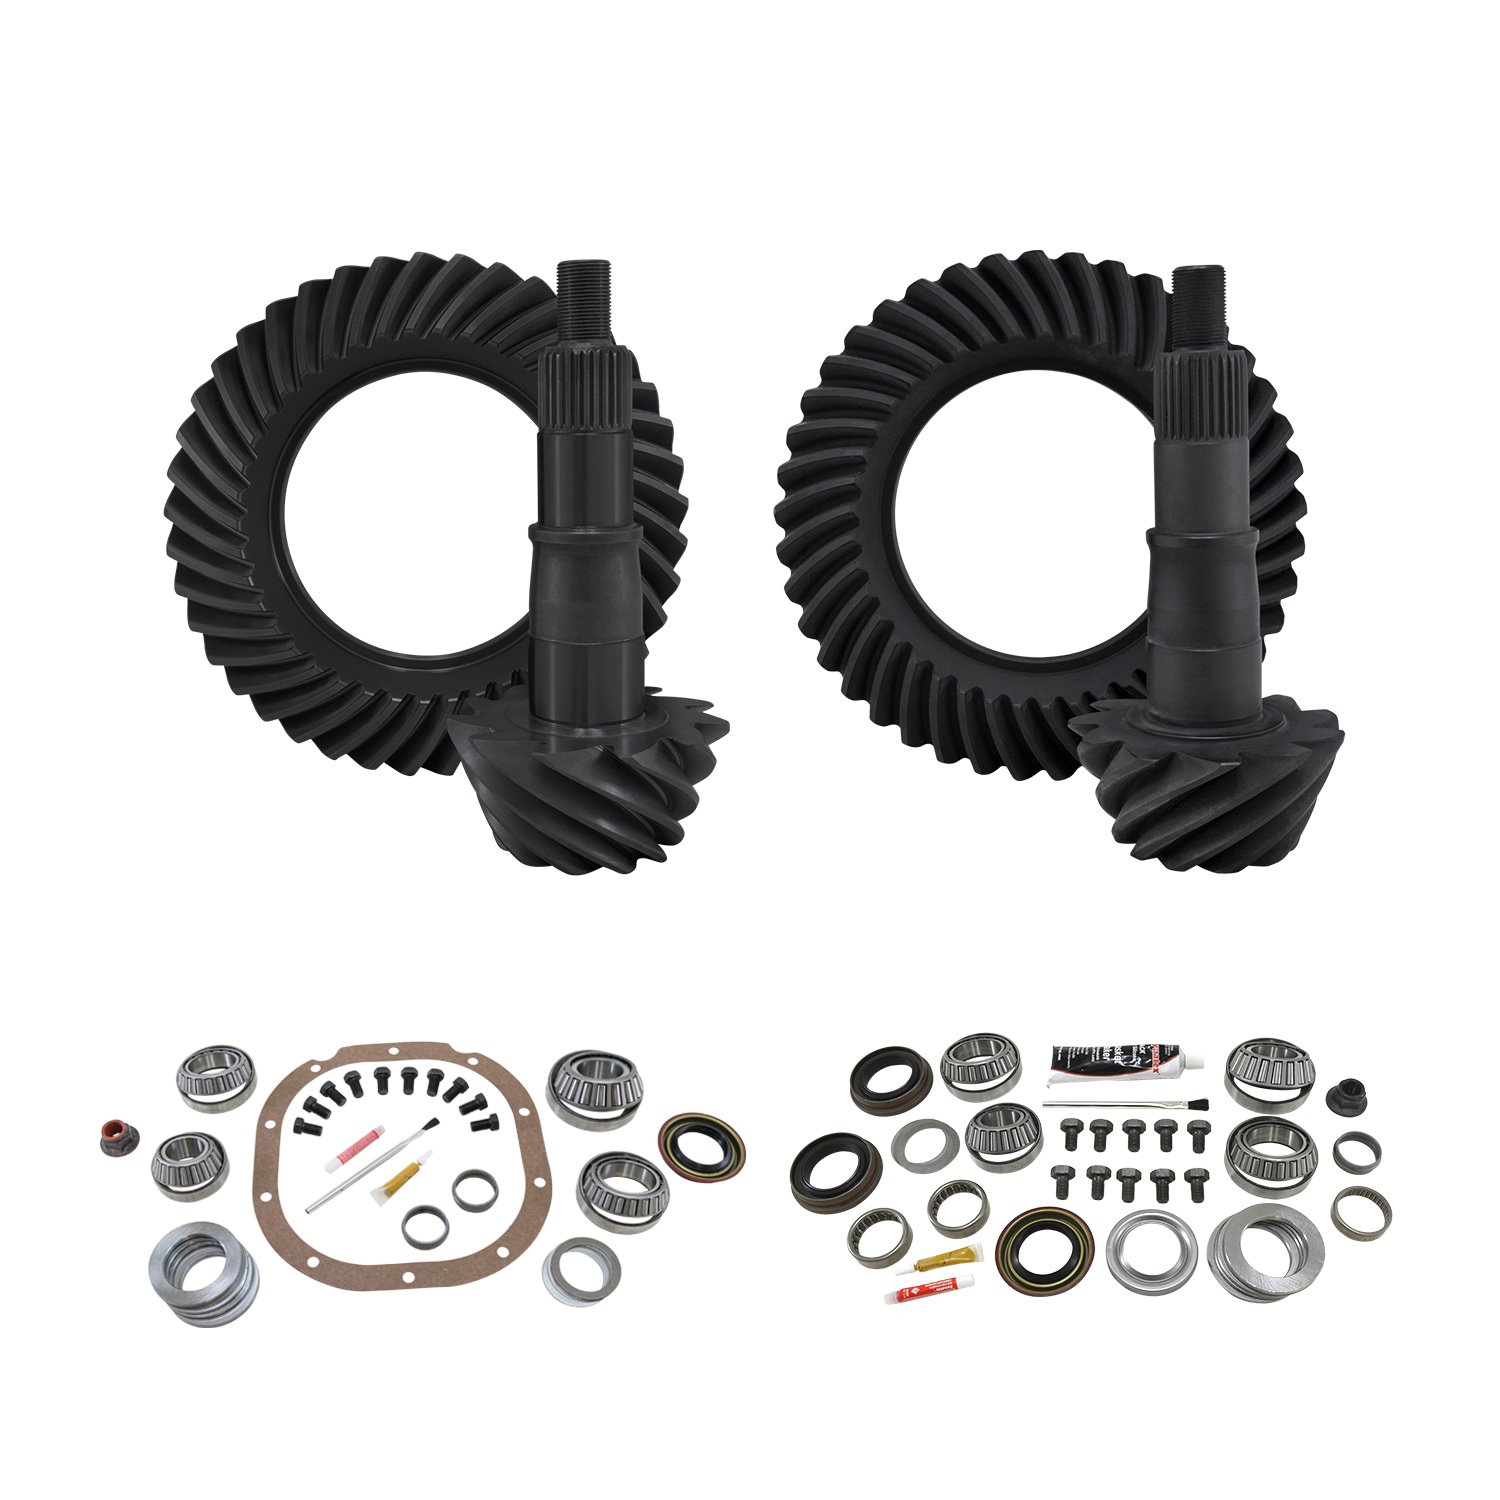 Re-Gear & Installation Kit, Ford 8.8 in., Various F150, 4.88 Ratio, Fr&Rr